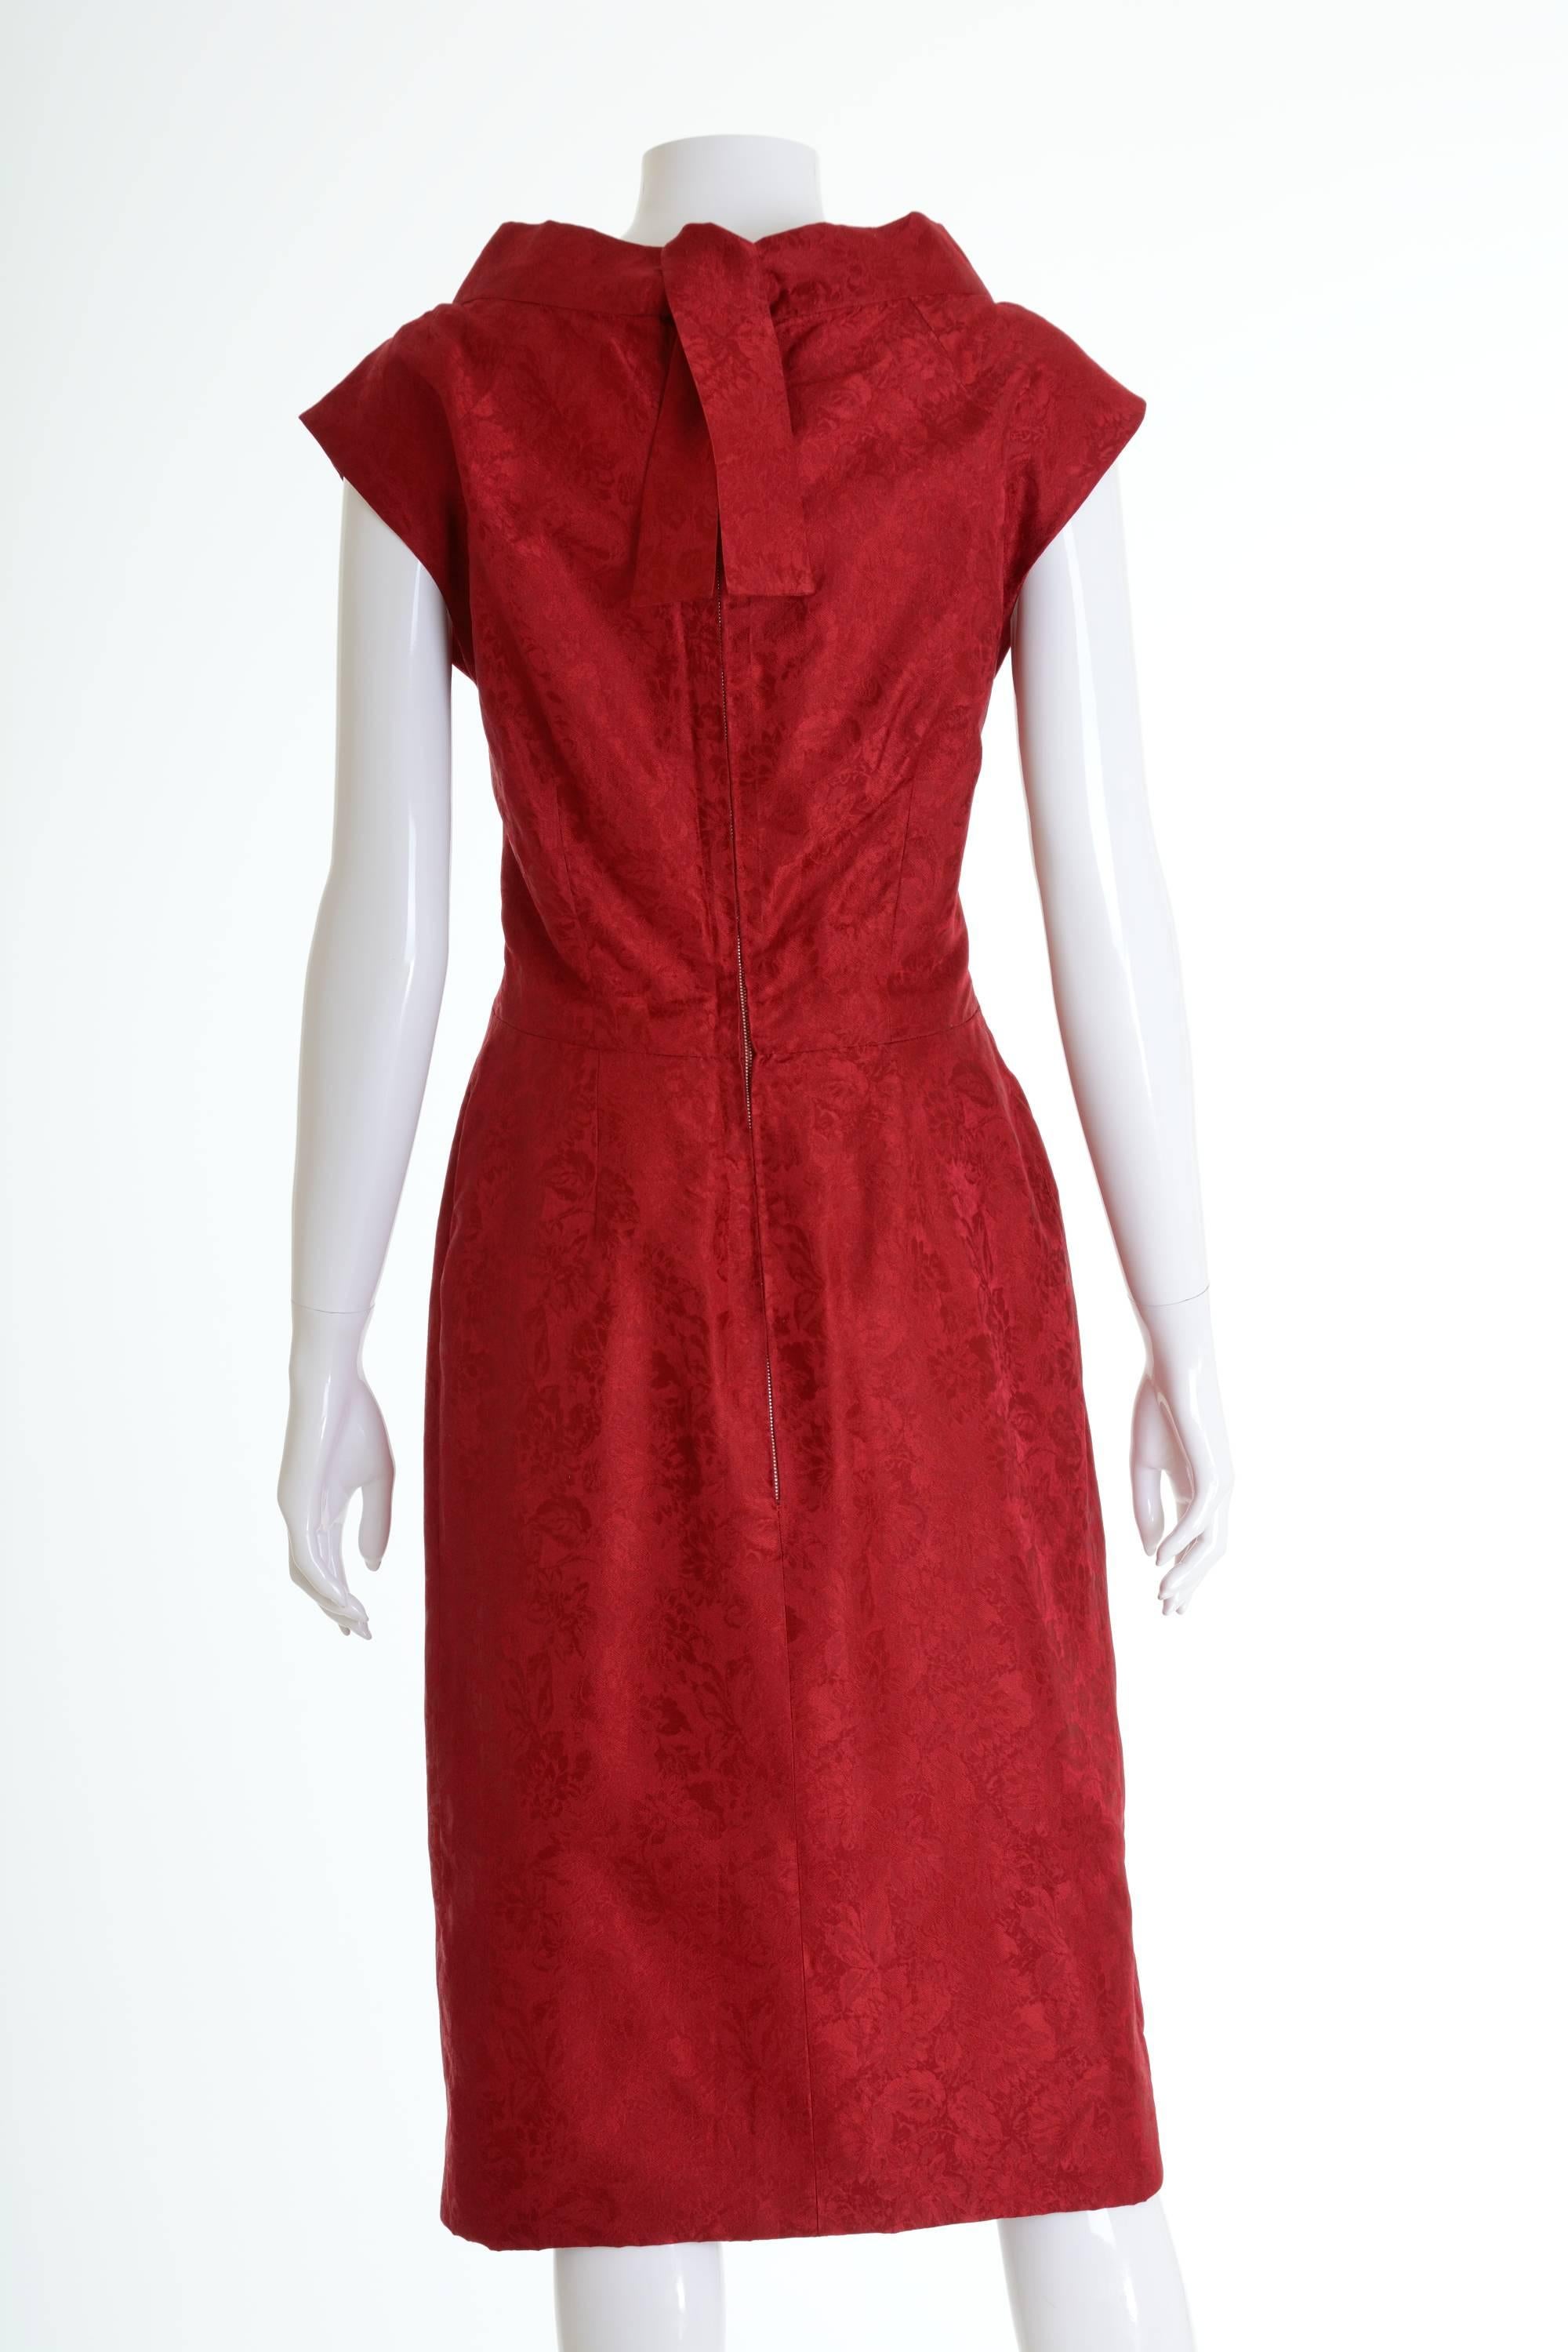 This lovely 1950s cocktail dress is in a burgundy red brocade silk fabric. It has low back line, back zip closure and amazing hourglass line. It's fully lined.

Very Good vintage condition

Label: N/A
Fabric: Silk
Color: burgundy